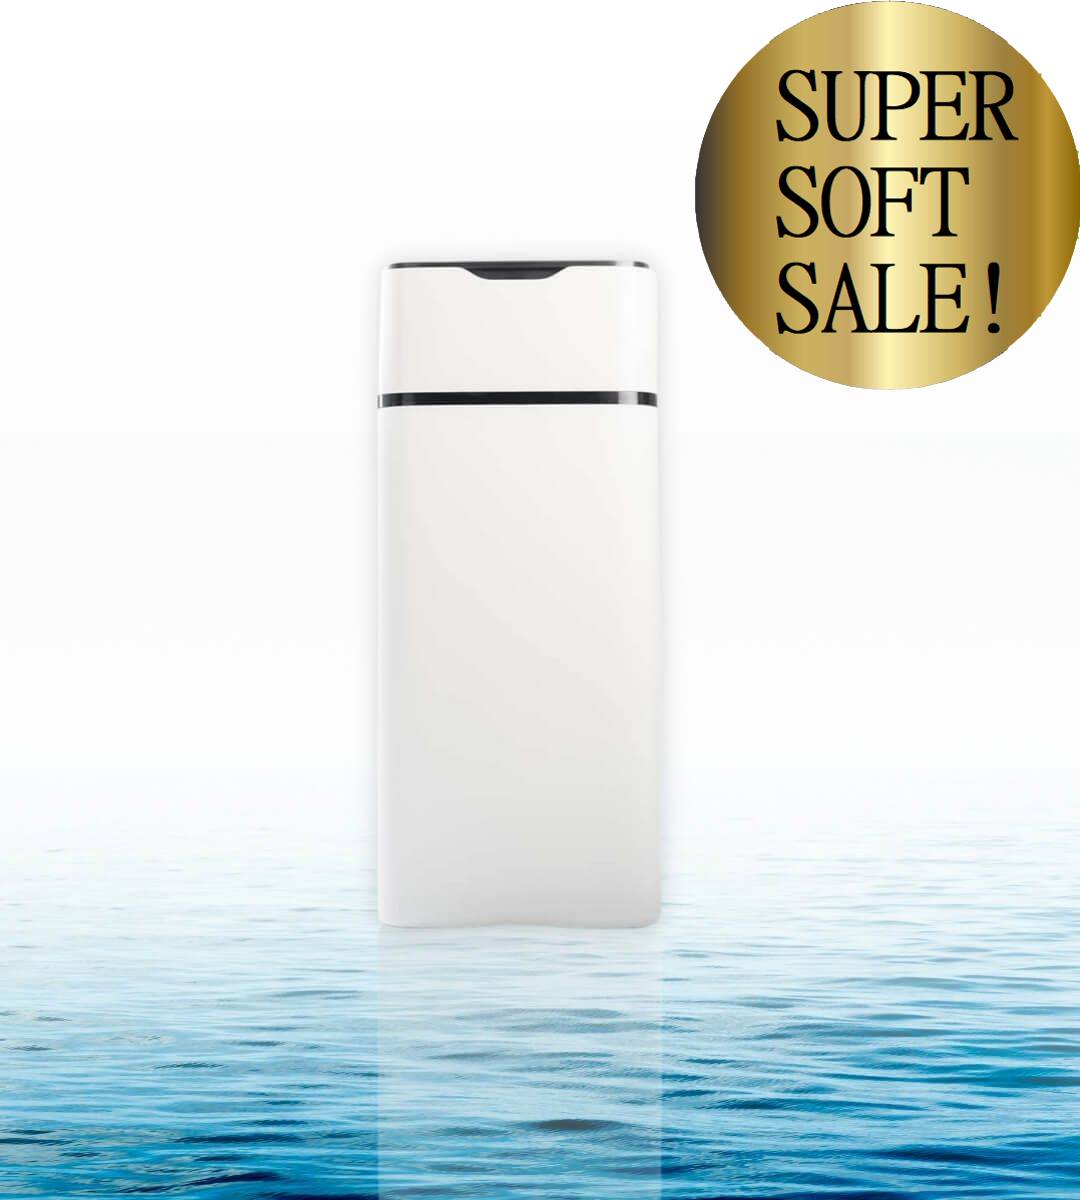 Eco Compact Waterontharder - Super Soft Sale